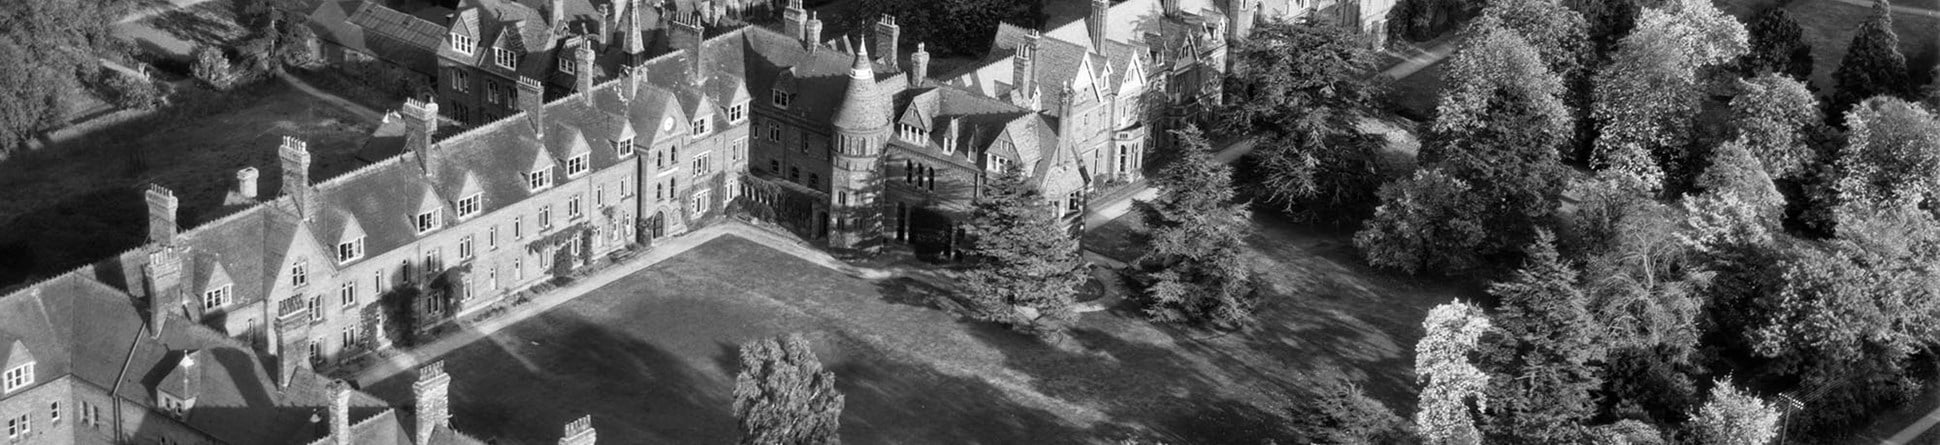 Aerial view of Girton College